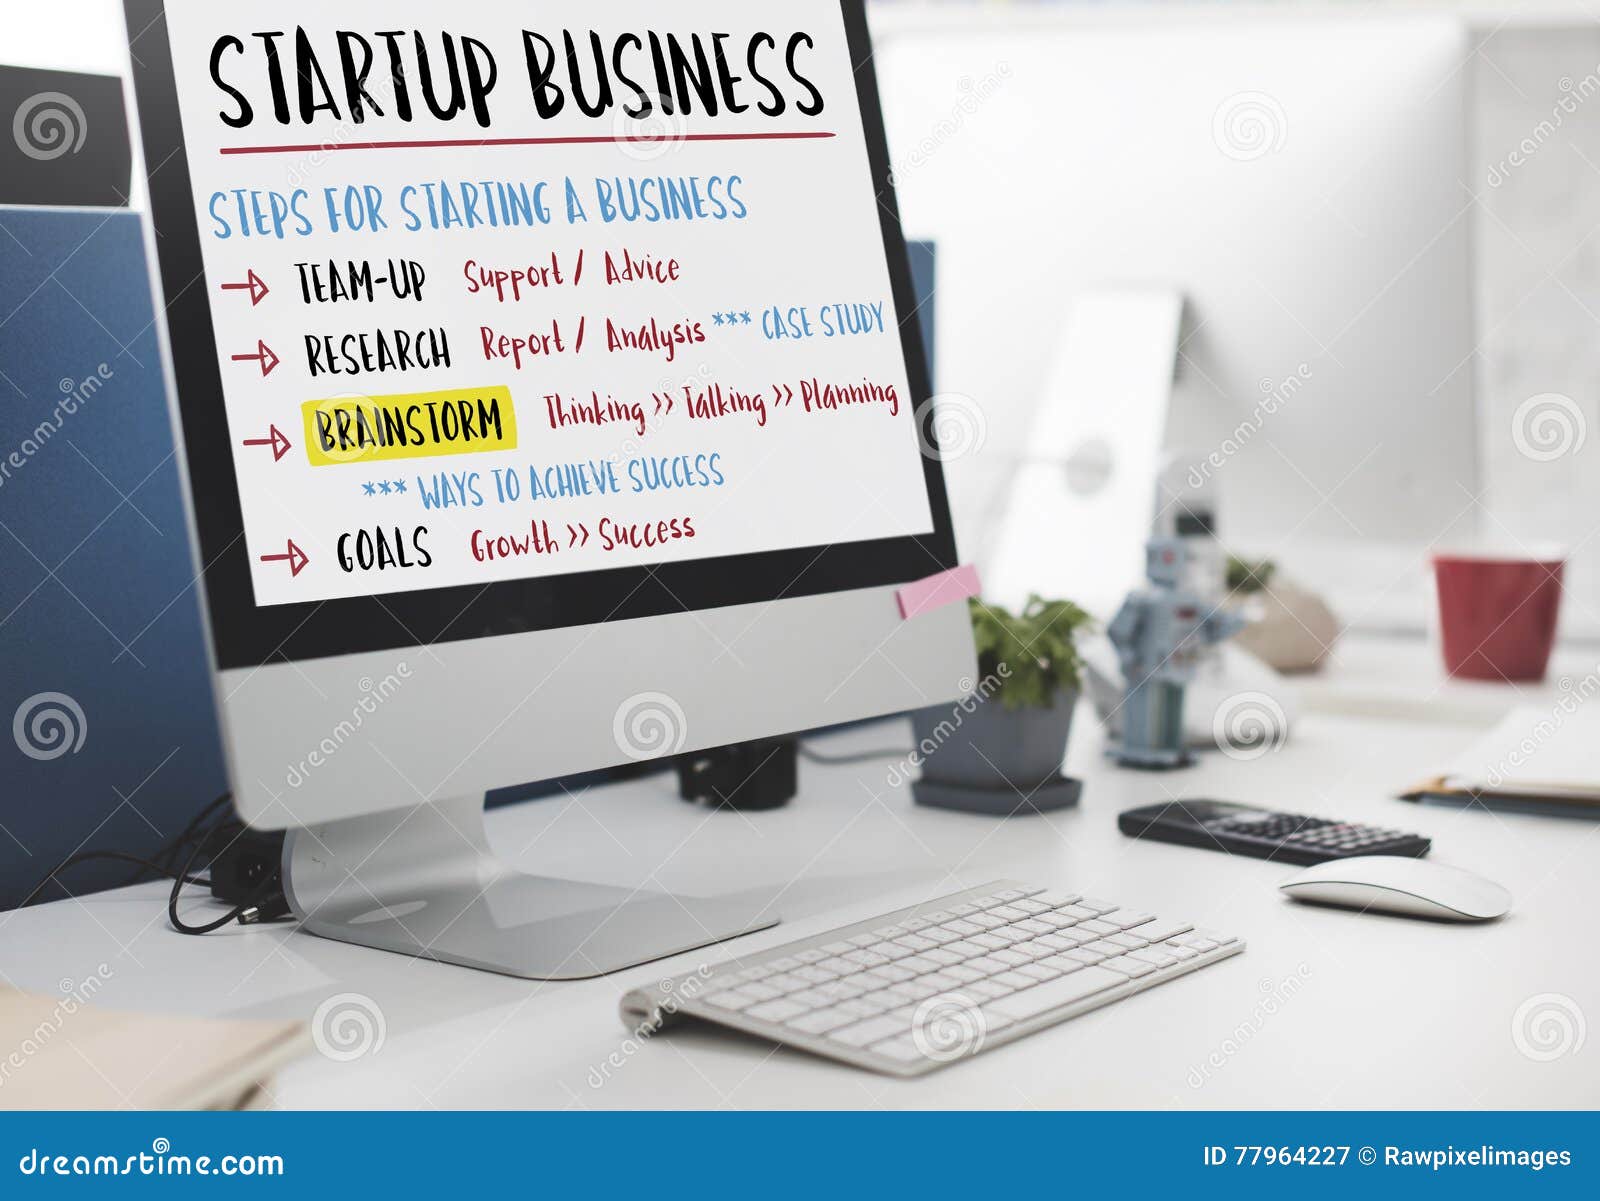 startup business plan steps graphic concept